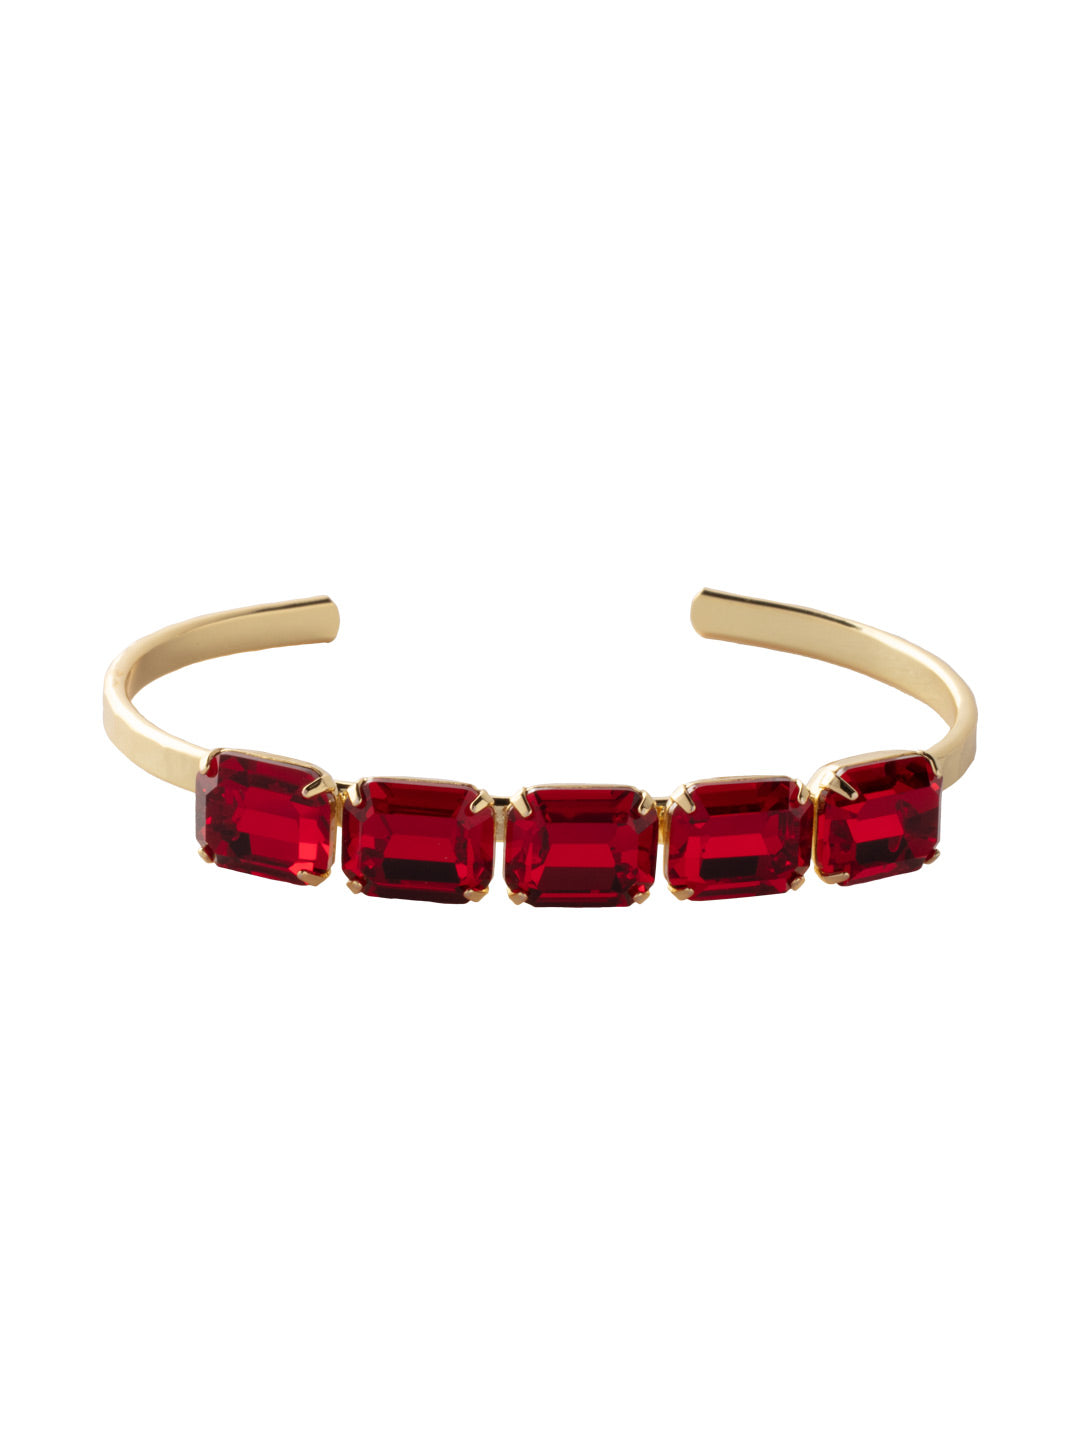 Emmy Cuff Bracelet - BEY40BGCB - <p>The Emmy Cuff Bracelet lines five emerald cut crystals on a metal tone adjustable cuff band to create a perfect piece to wear alone or layer. From Sorrelli's Cranberry collection in our Bright Gold-tone finish.</p>